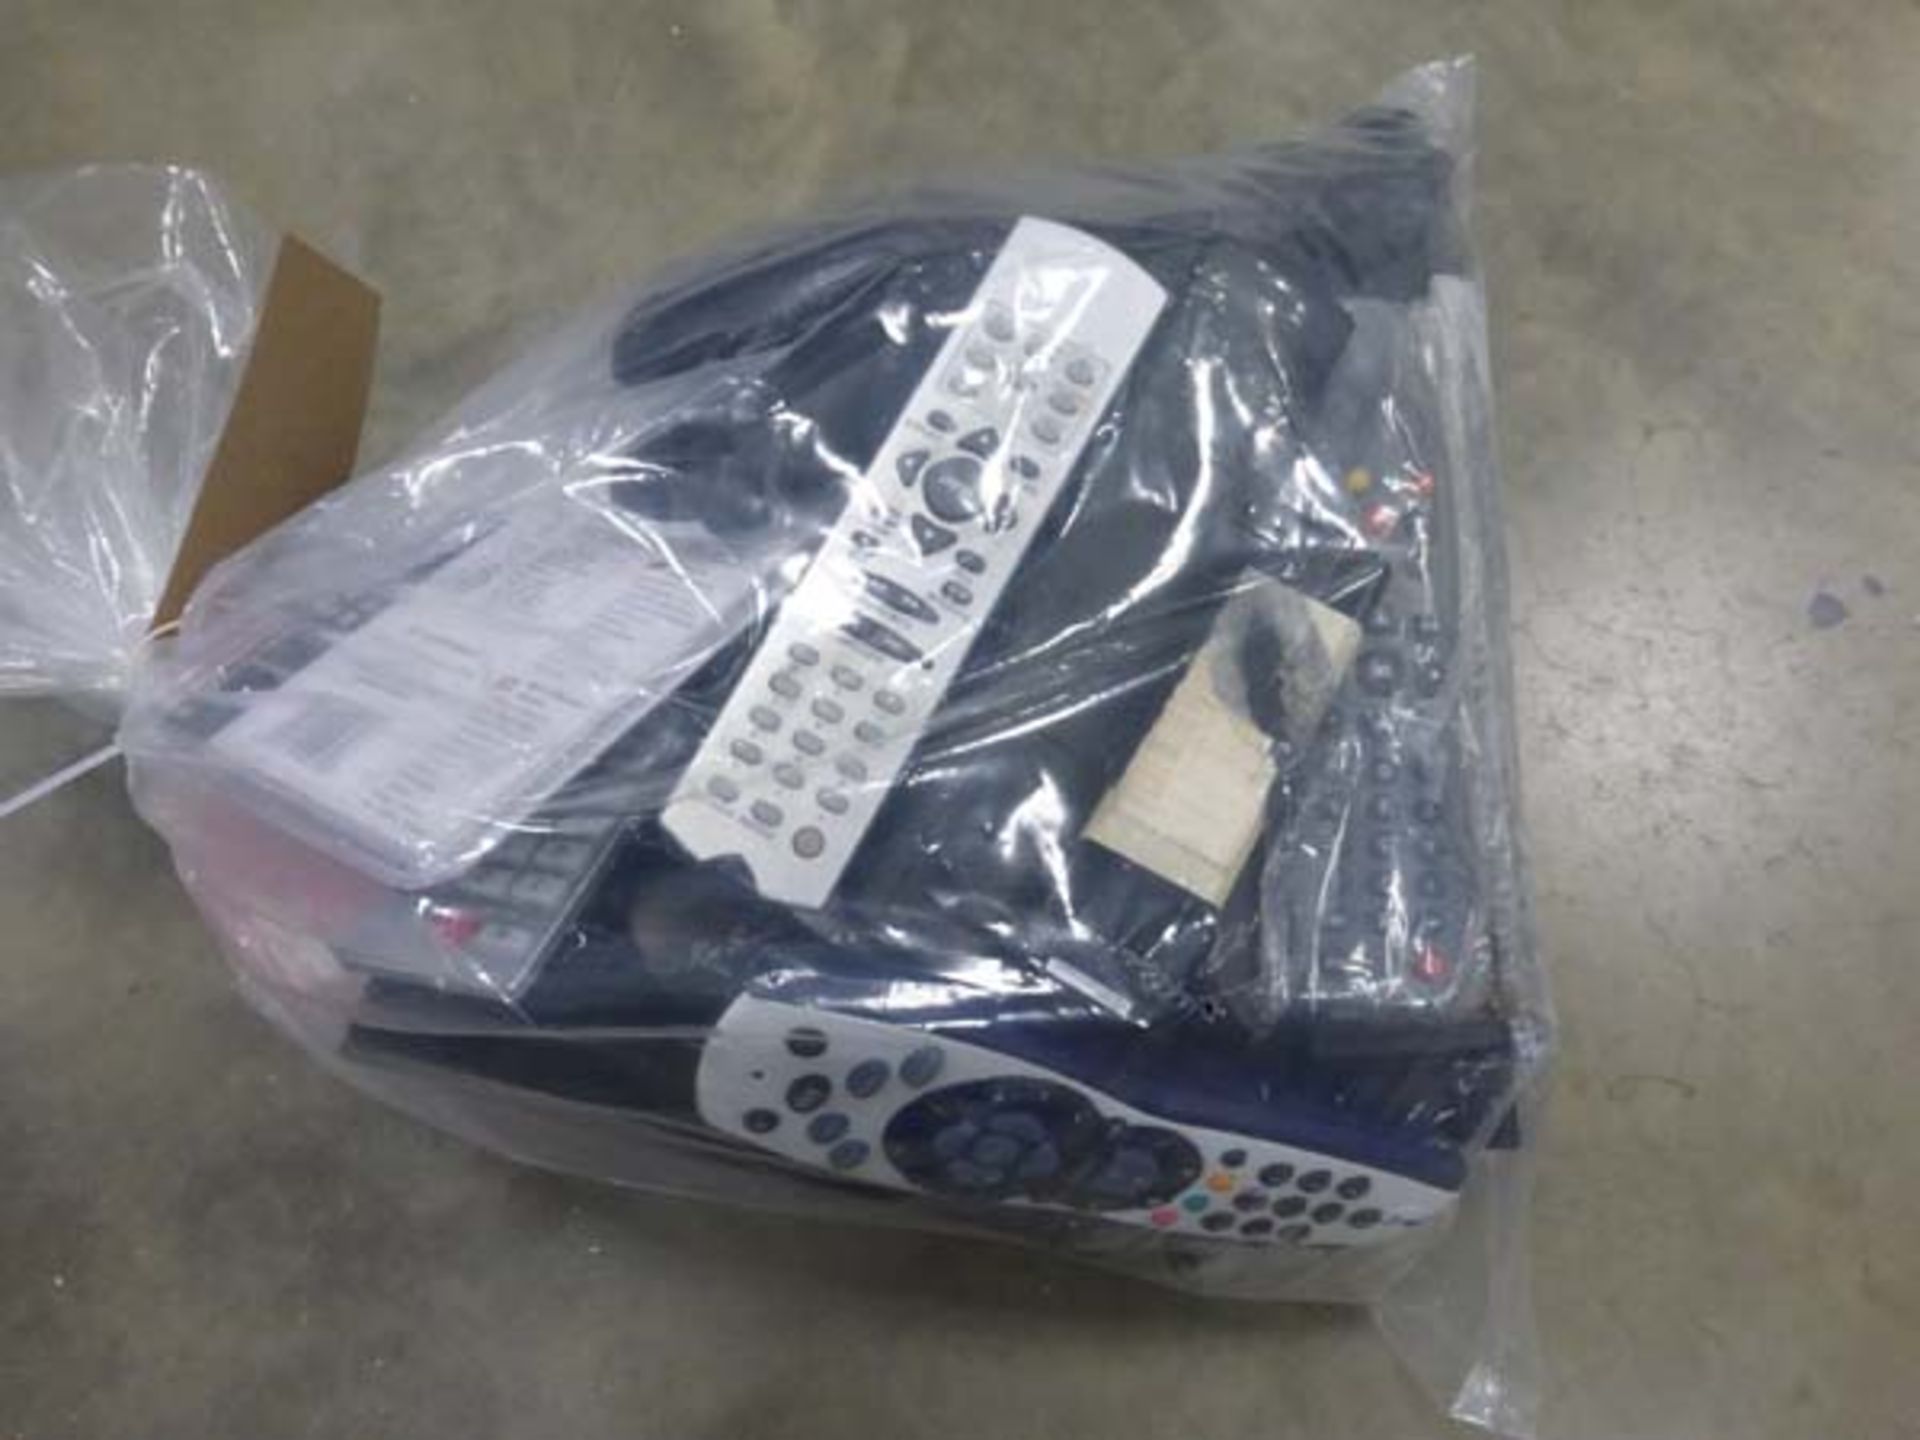 Bag containing various replacement remote controls